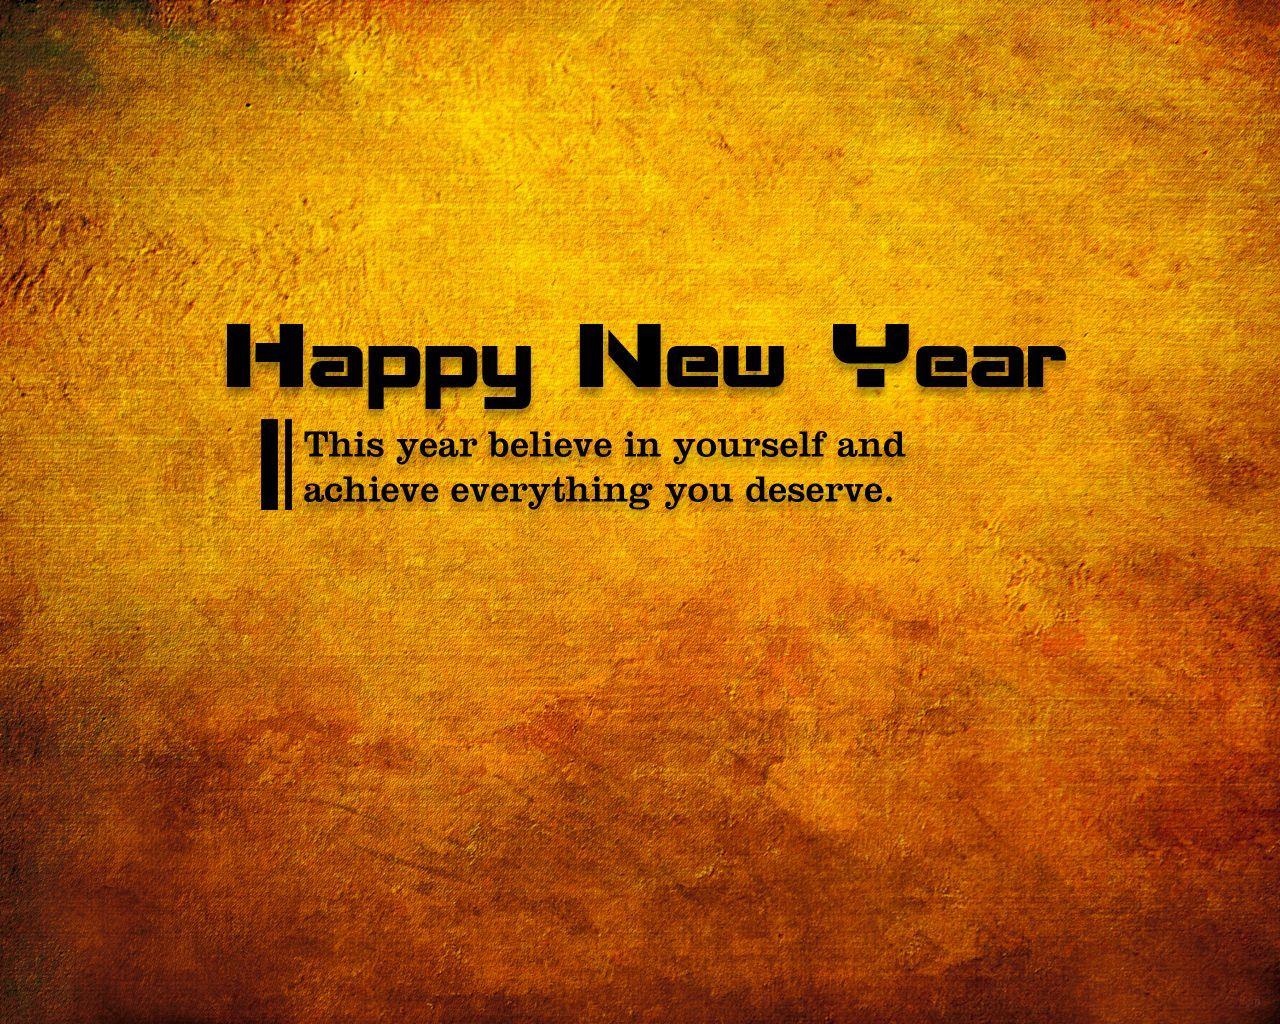 New Year Quotes Wallpapers - Top Free New Year Quotes Backgrounds ...